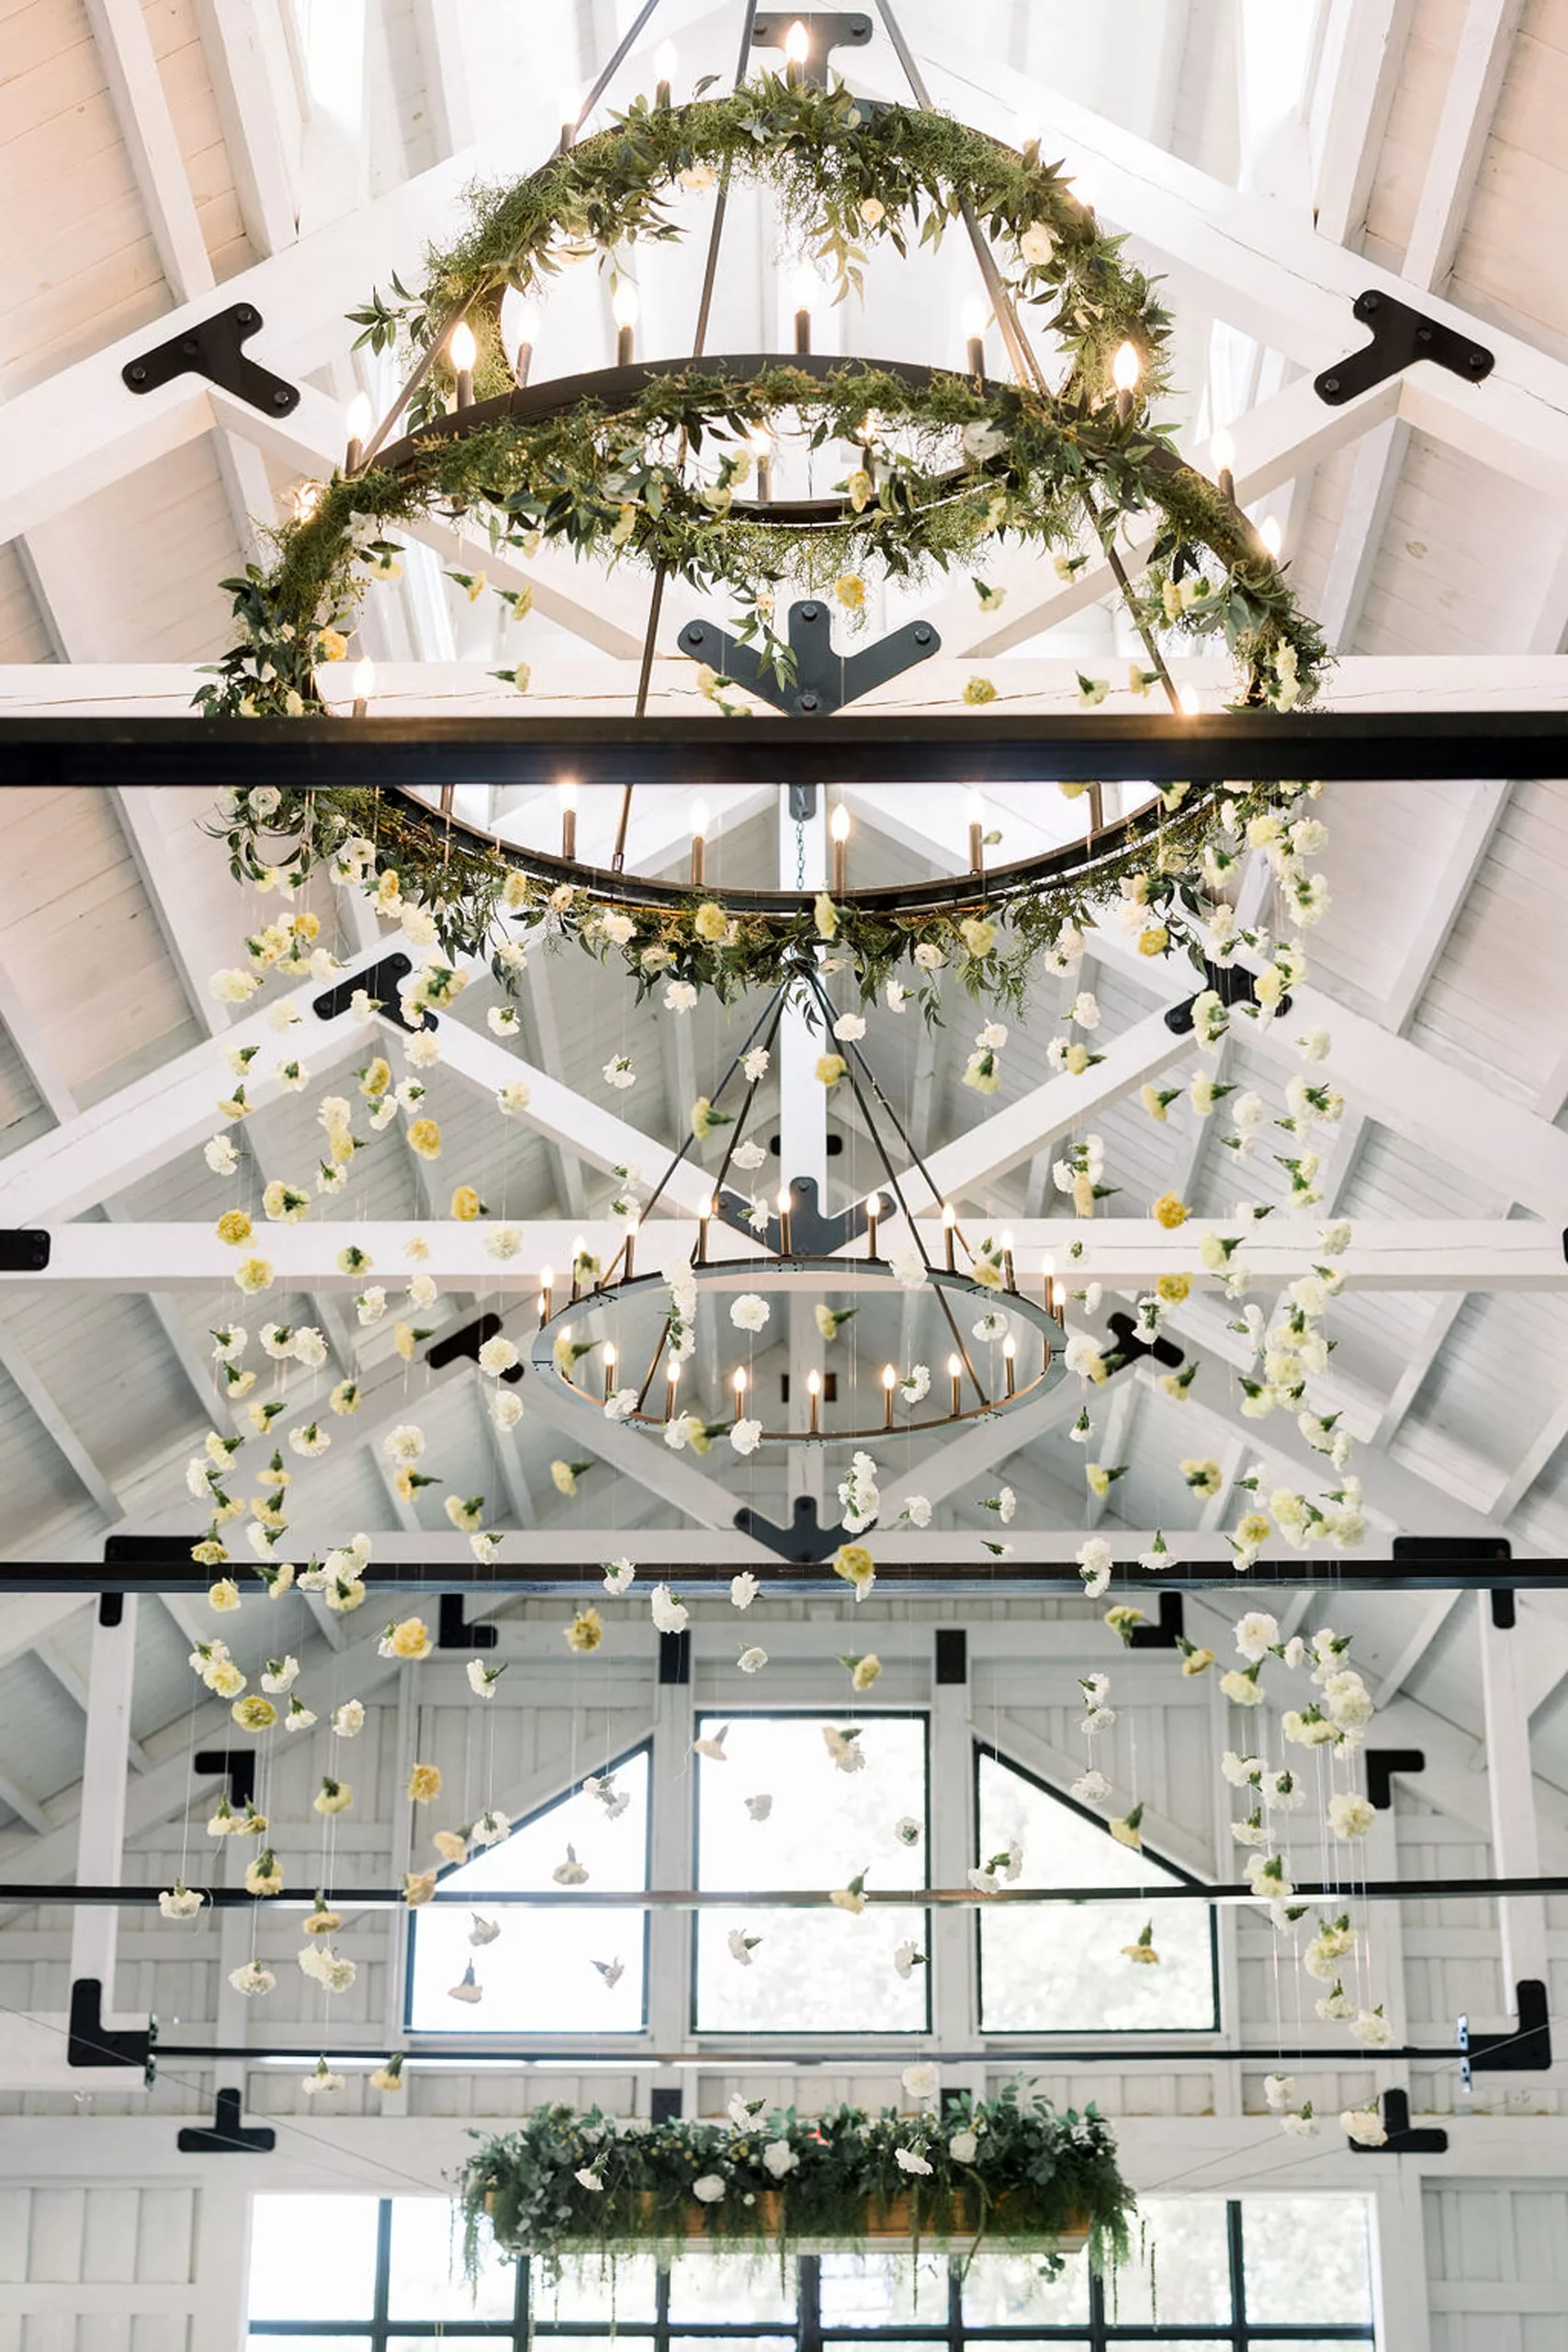 Details of live chandeliers hanging in a white reception hall